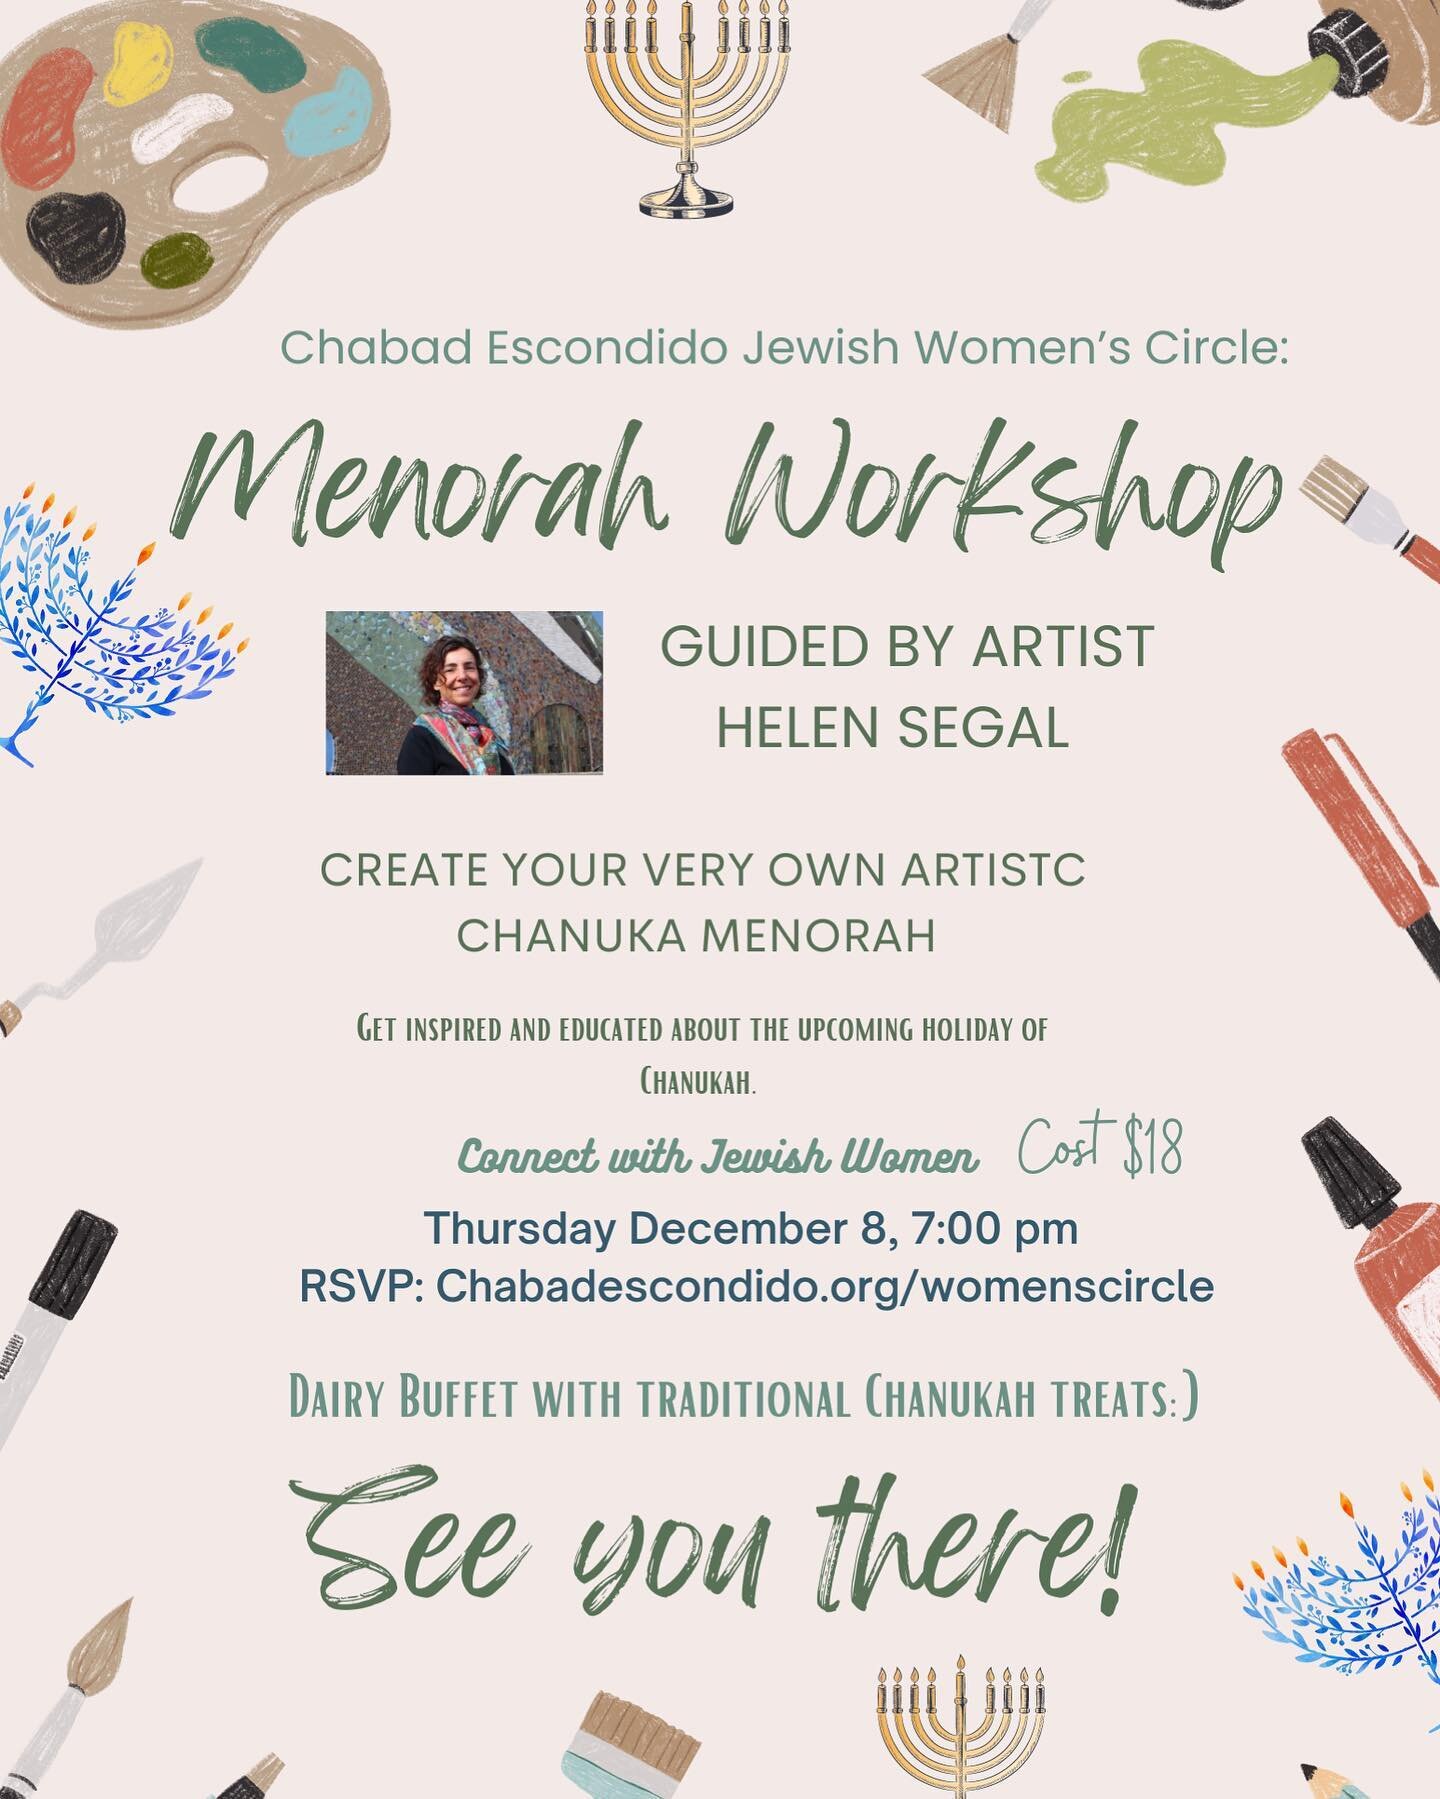 Hey Jewish Women of Escondido! This months JWC is coming up! Join us as we are guided by Artist Helen Segal in creating a beautiful artistic Menorah in honor of Chanukah! Delicious eats &amp; inspiring holiday insights will be added to the fun! Sign 